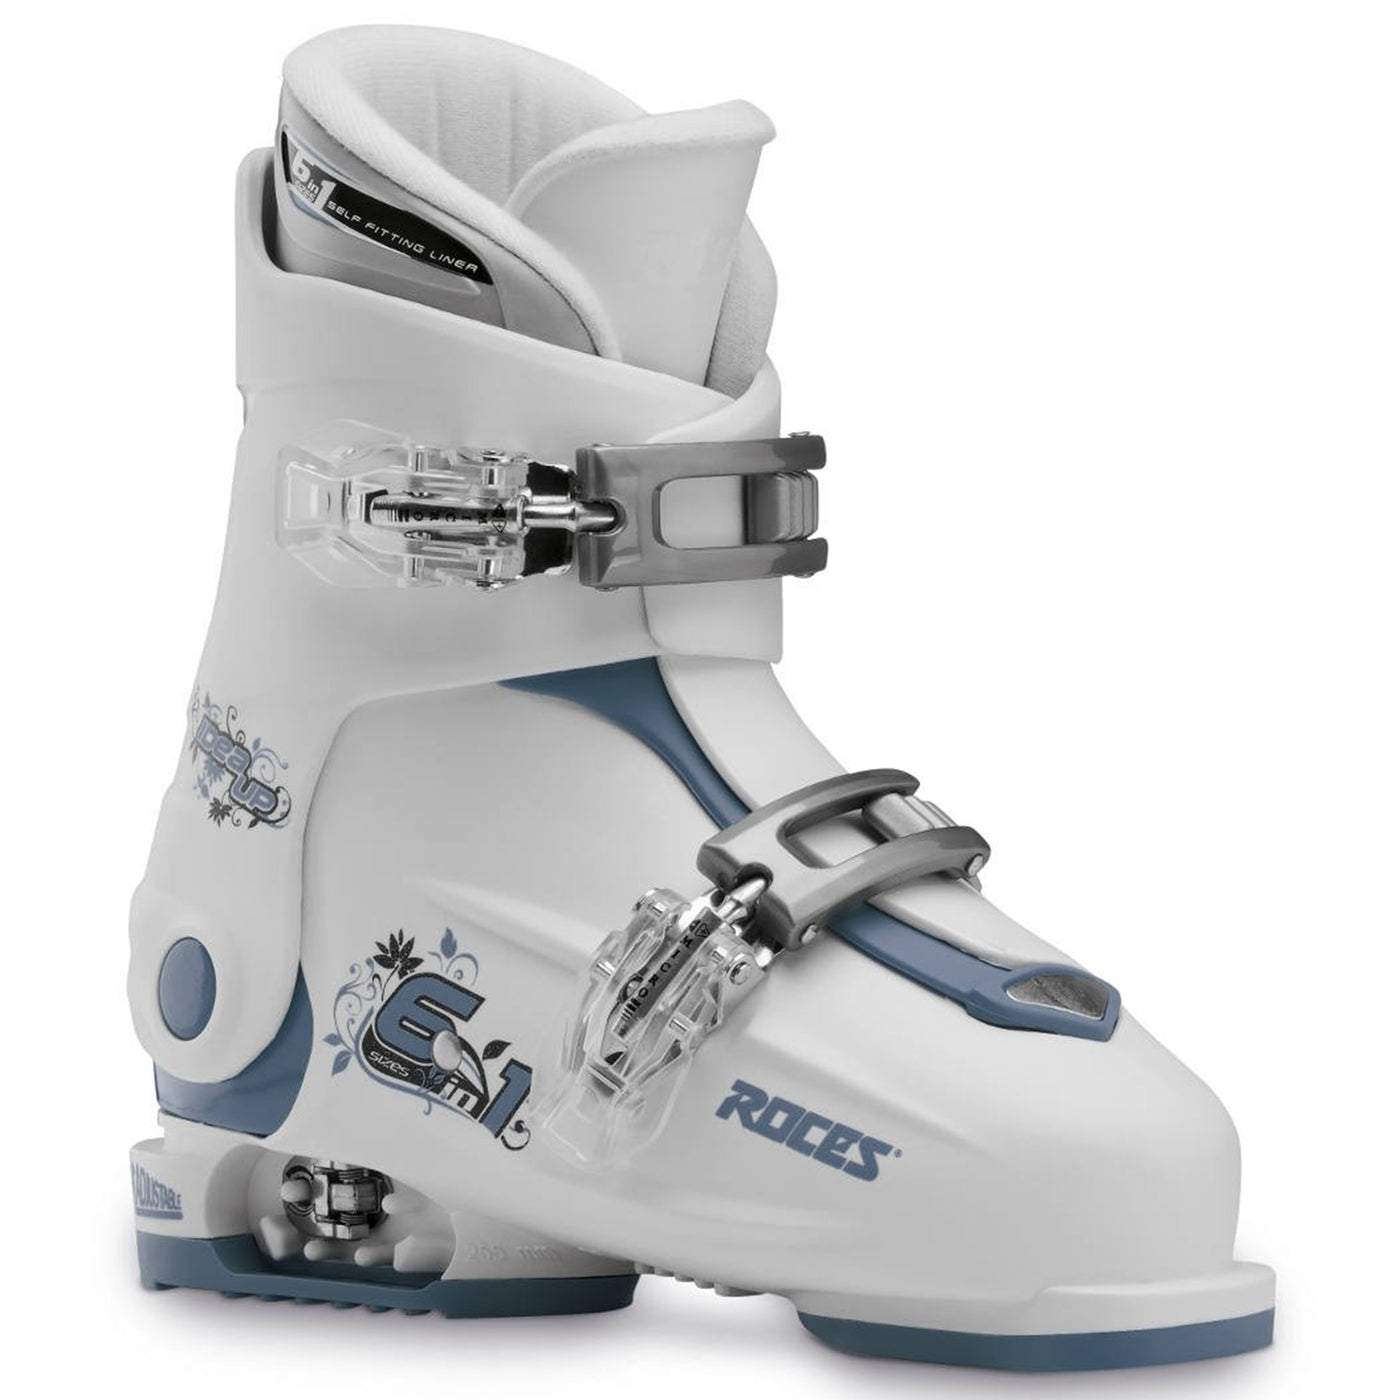 Roces IDEA Up Adjustable Youth Ski Boots | Size 19.0 - 22.0 MP SKI BOOTS Roces White/Teal  